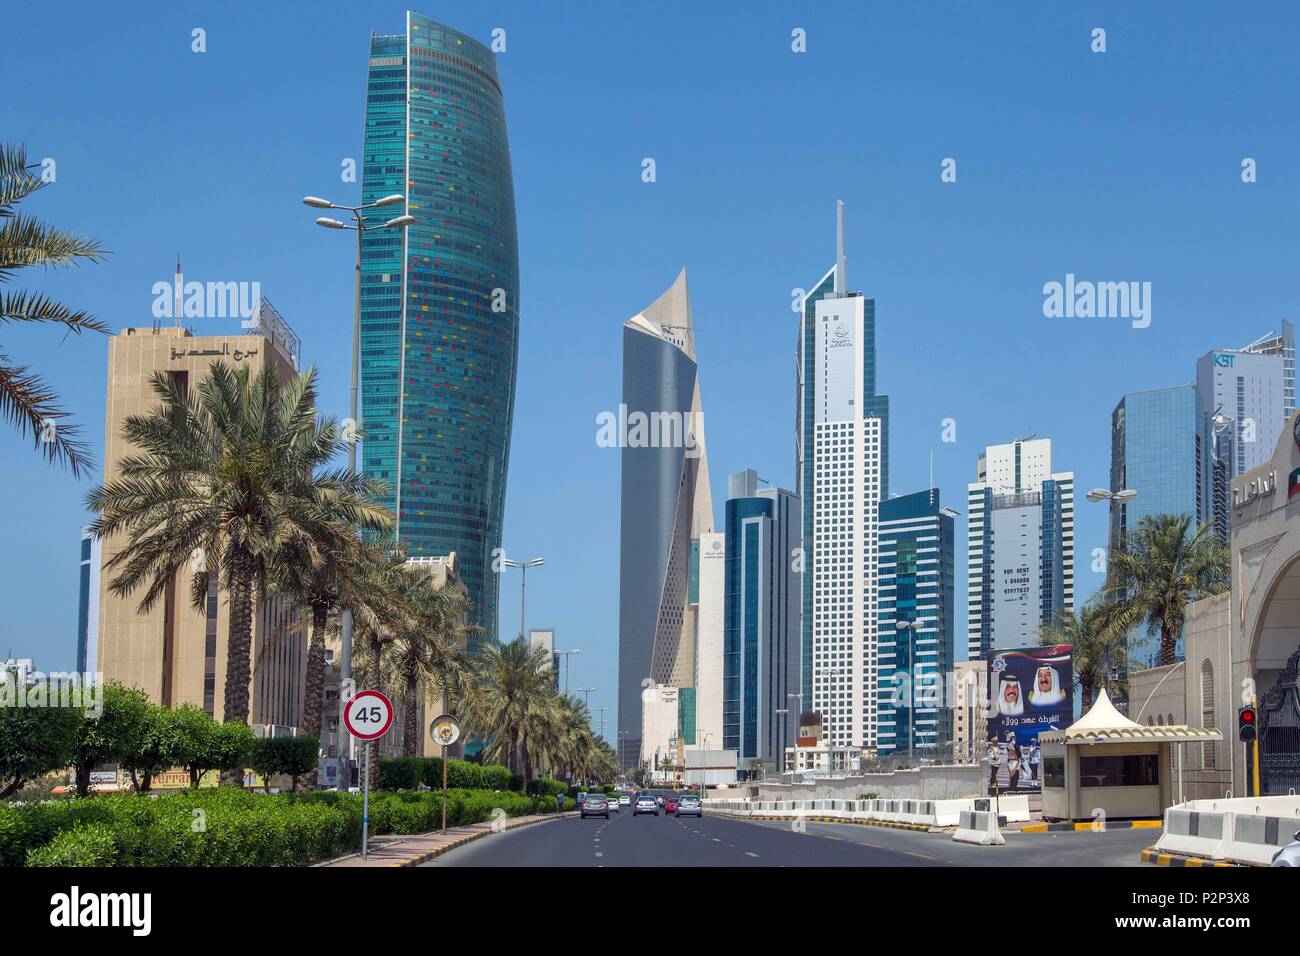 Kuwait, Persian Gulf, Kuwait City, AL Hamra tower in background and Kipco tower at foreground in Central Business district Stock Photo